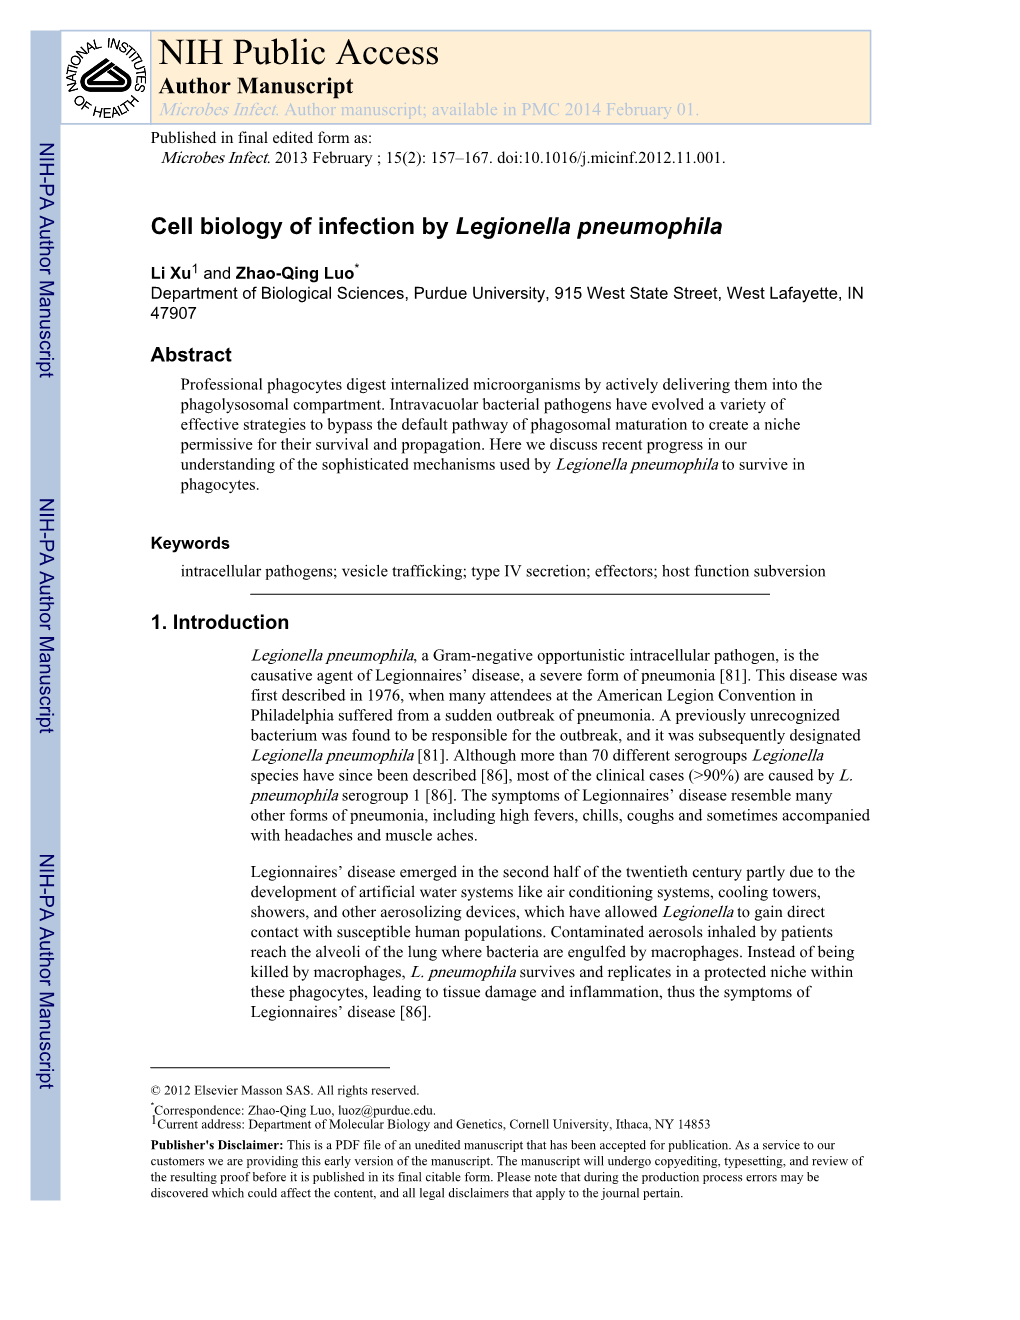 Cell Biology of Infection by Legionella Pneumophila